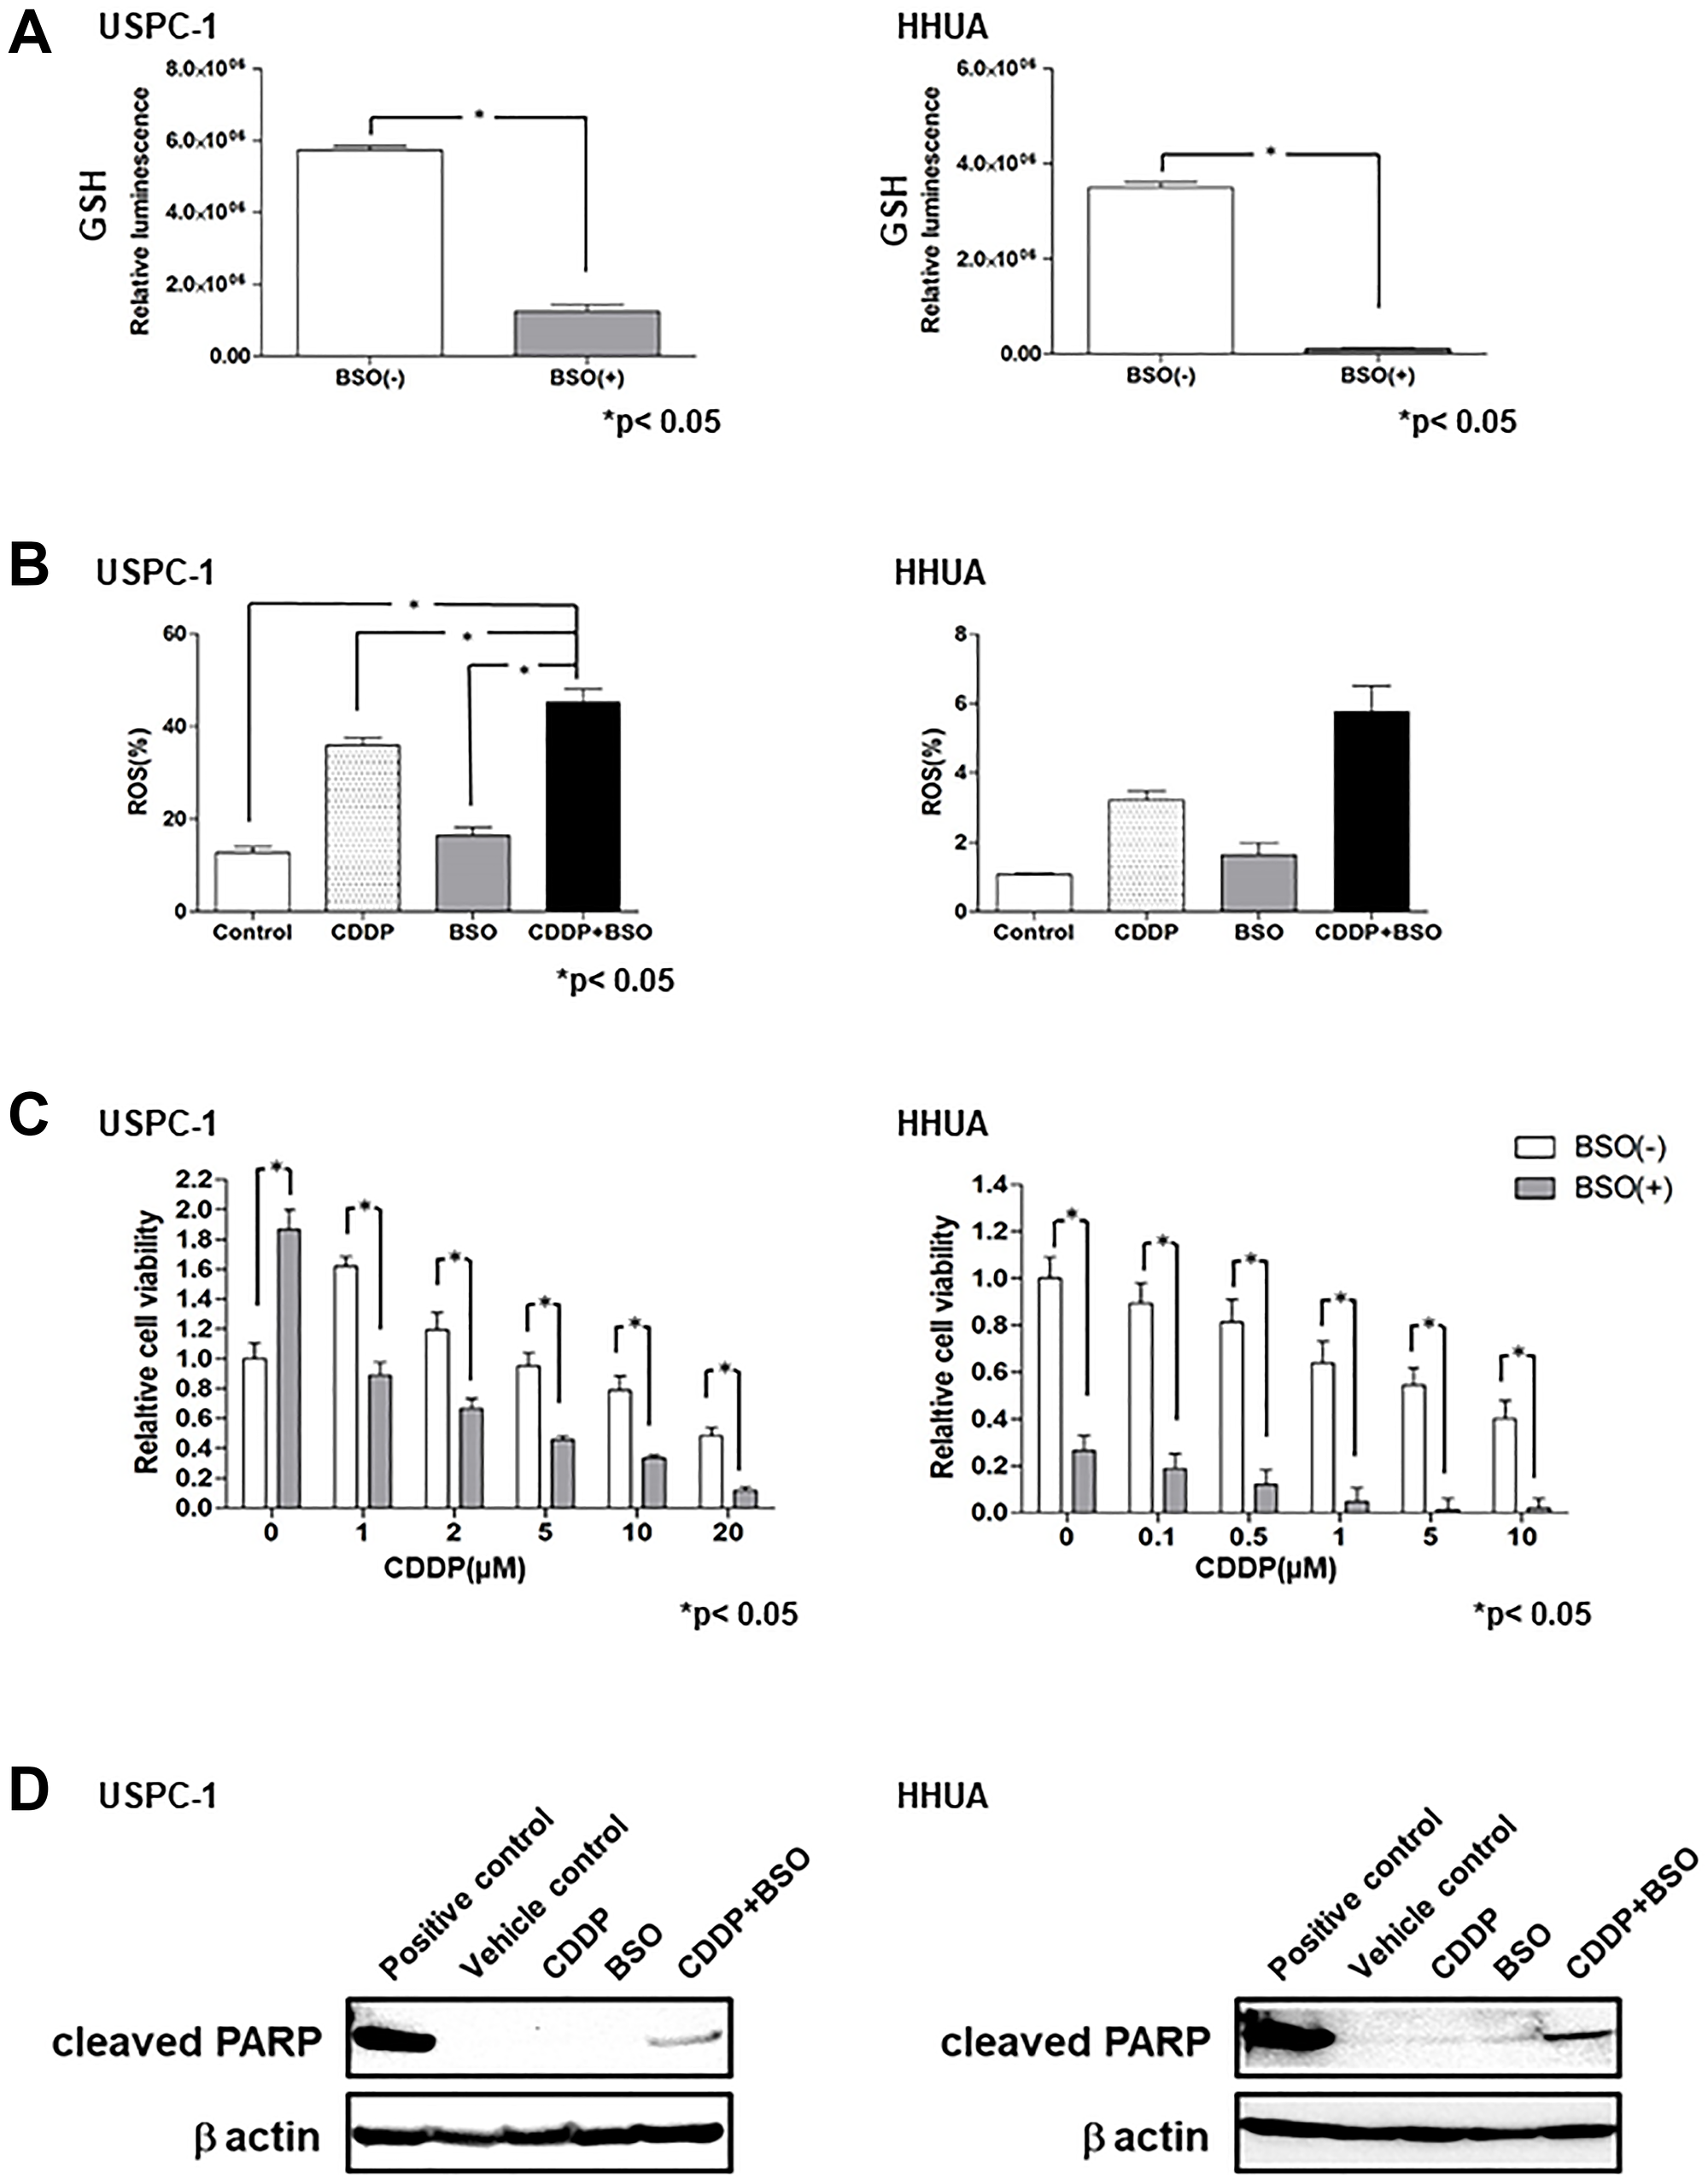 Buthionine sulfoximine (BSO) decreases intracellular glutathione (GSH) levels and inhibits cell proliferation with cisplatin (CDDP) in endometrial carcinoma cell lines.